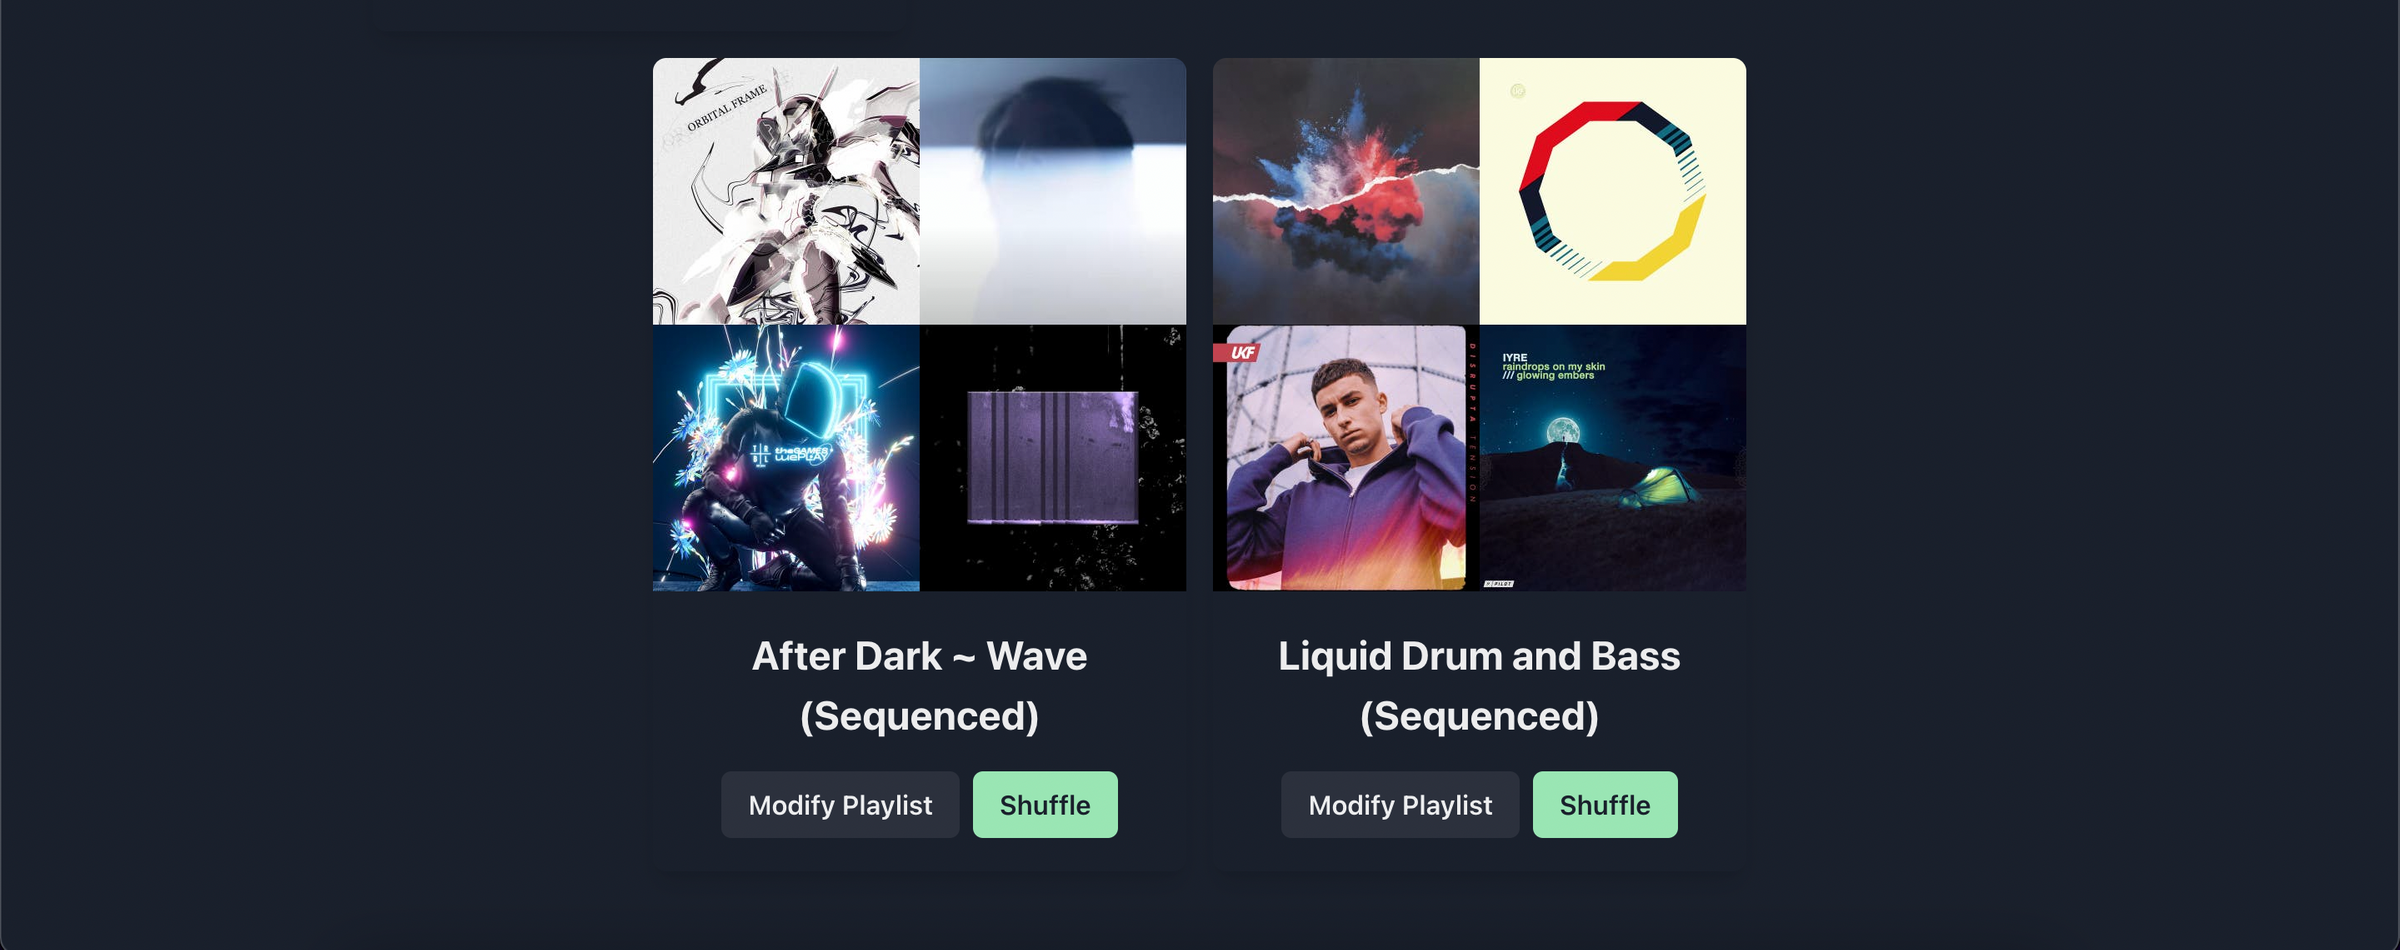 Sequenced Playlists